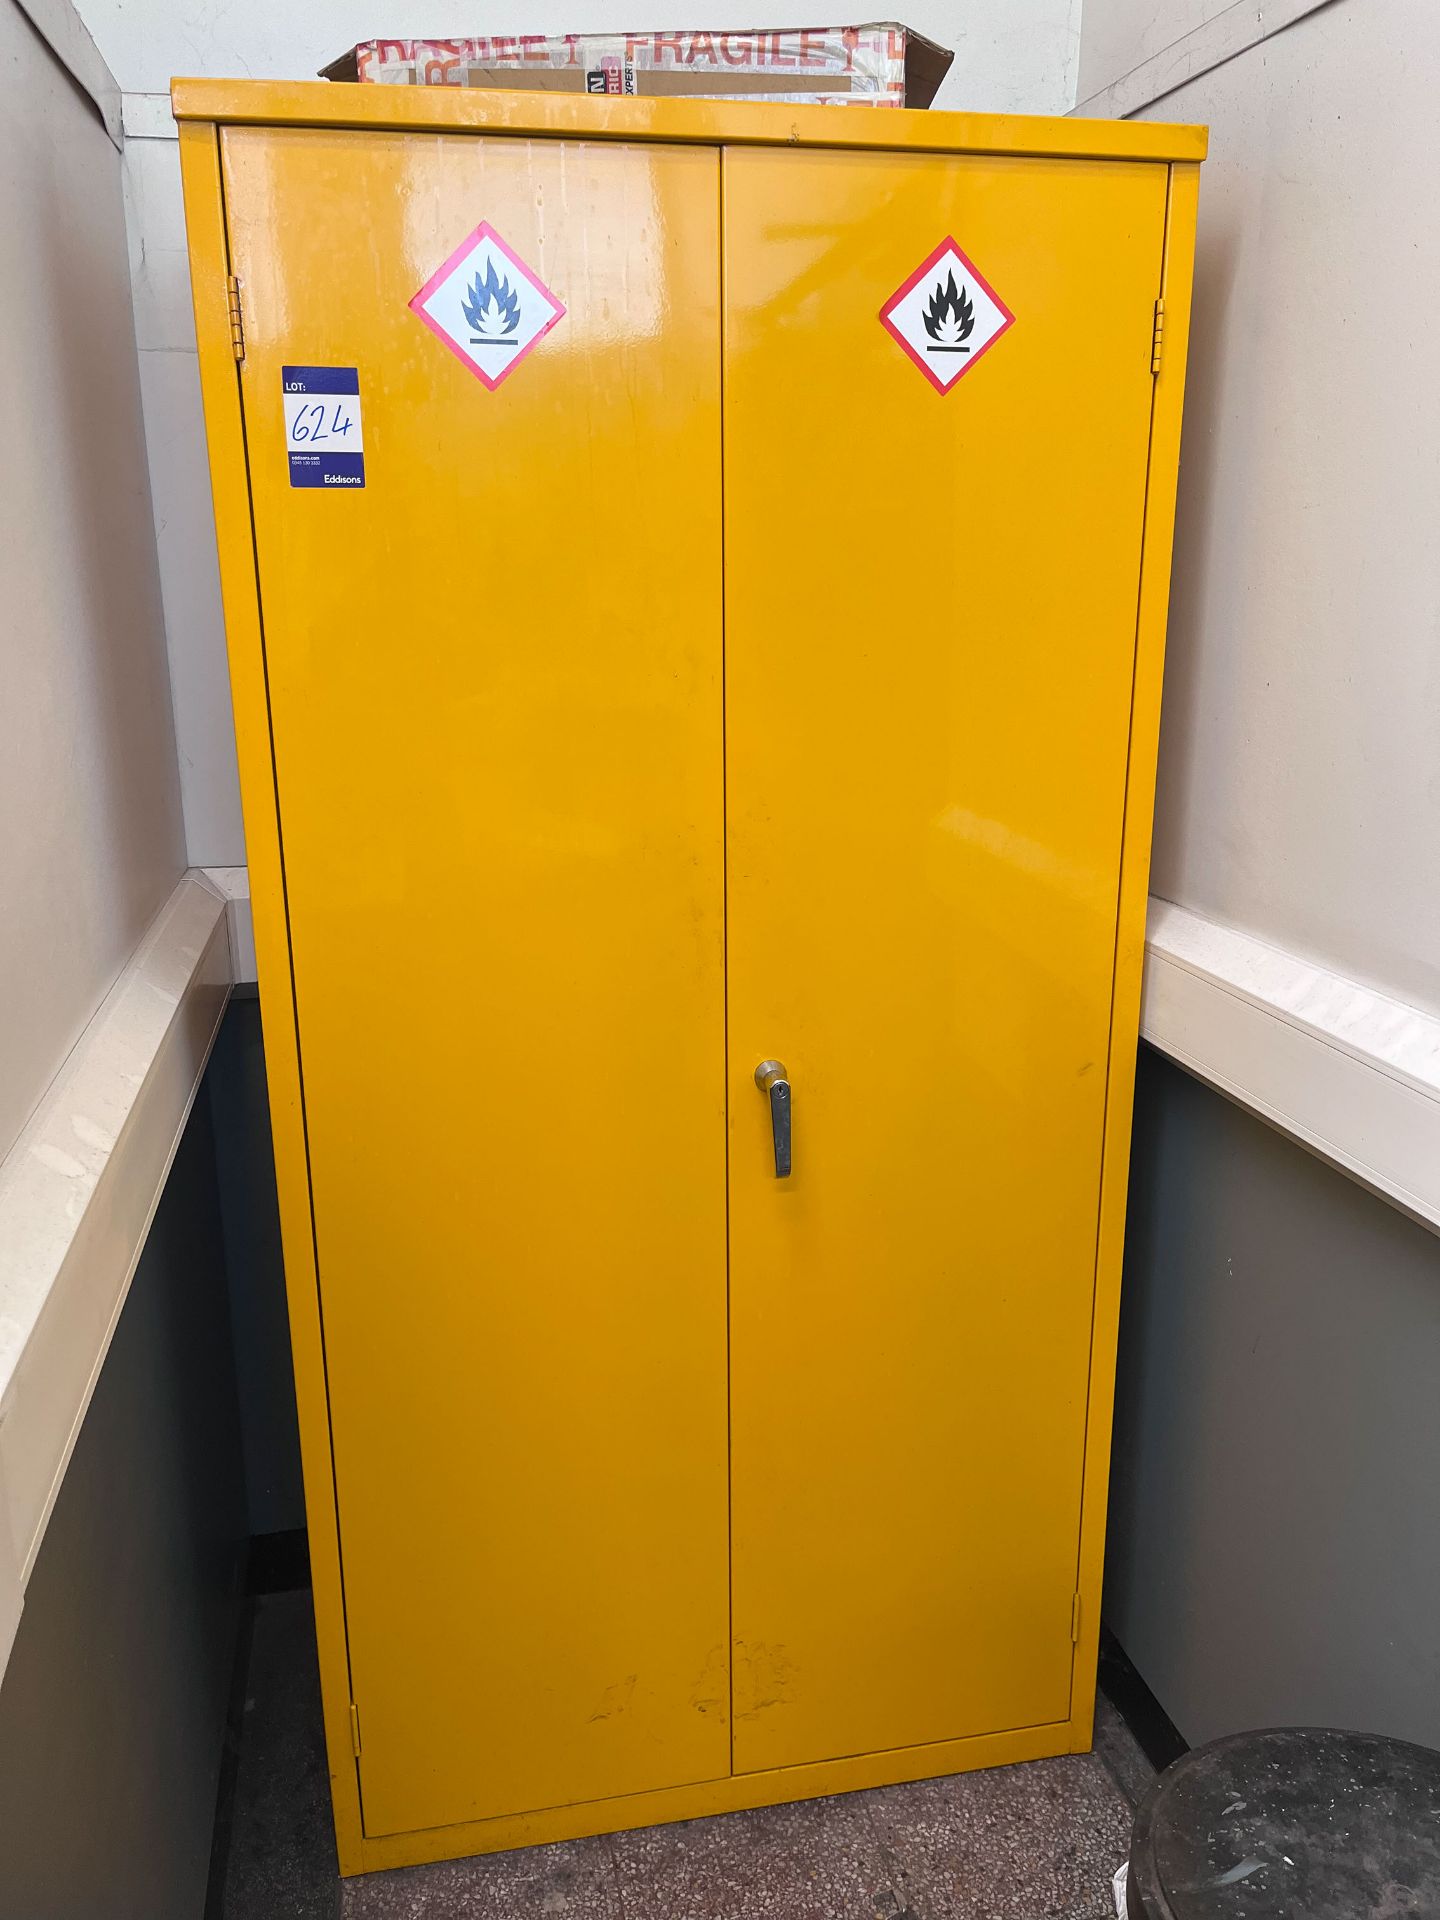 Fabricated Sample Bench, Spares Cupboard, Office Cupboard, Hazardous Material/COSHH Cabinet, Wall Mo - Bild 5 aus 8